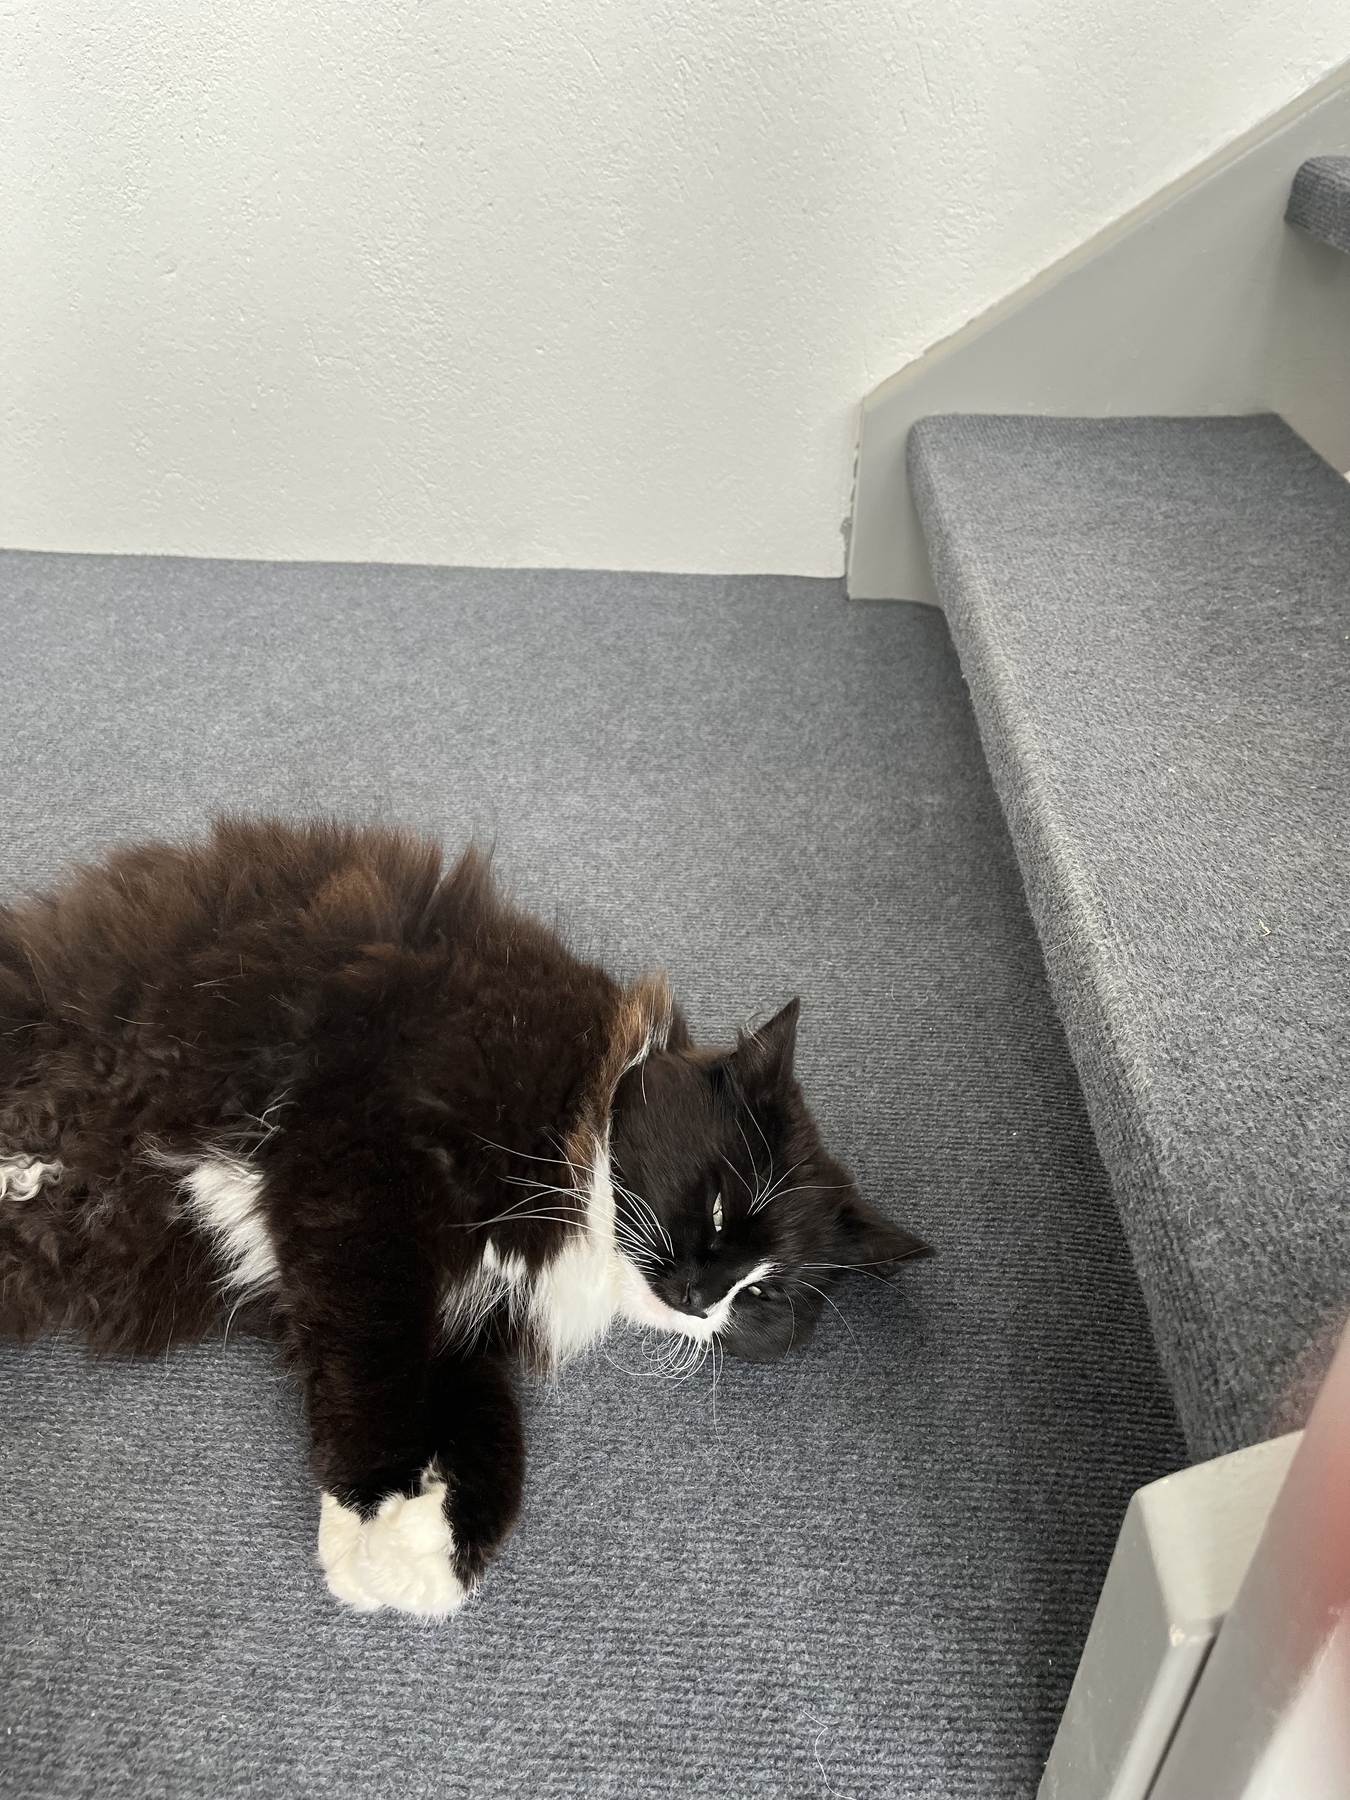 But, before the neighbour cat leaves, she has aa quick relaxing roll and rub on the stair carpet.